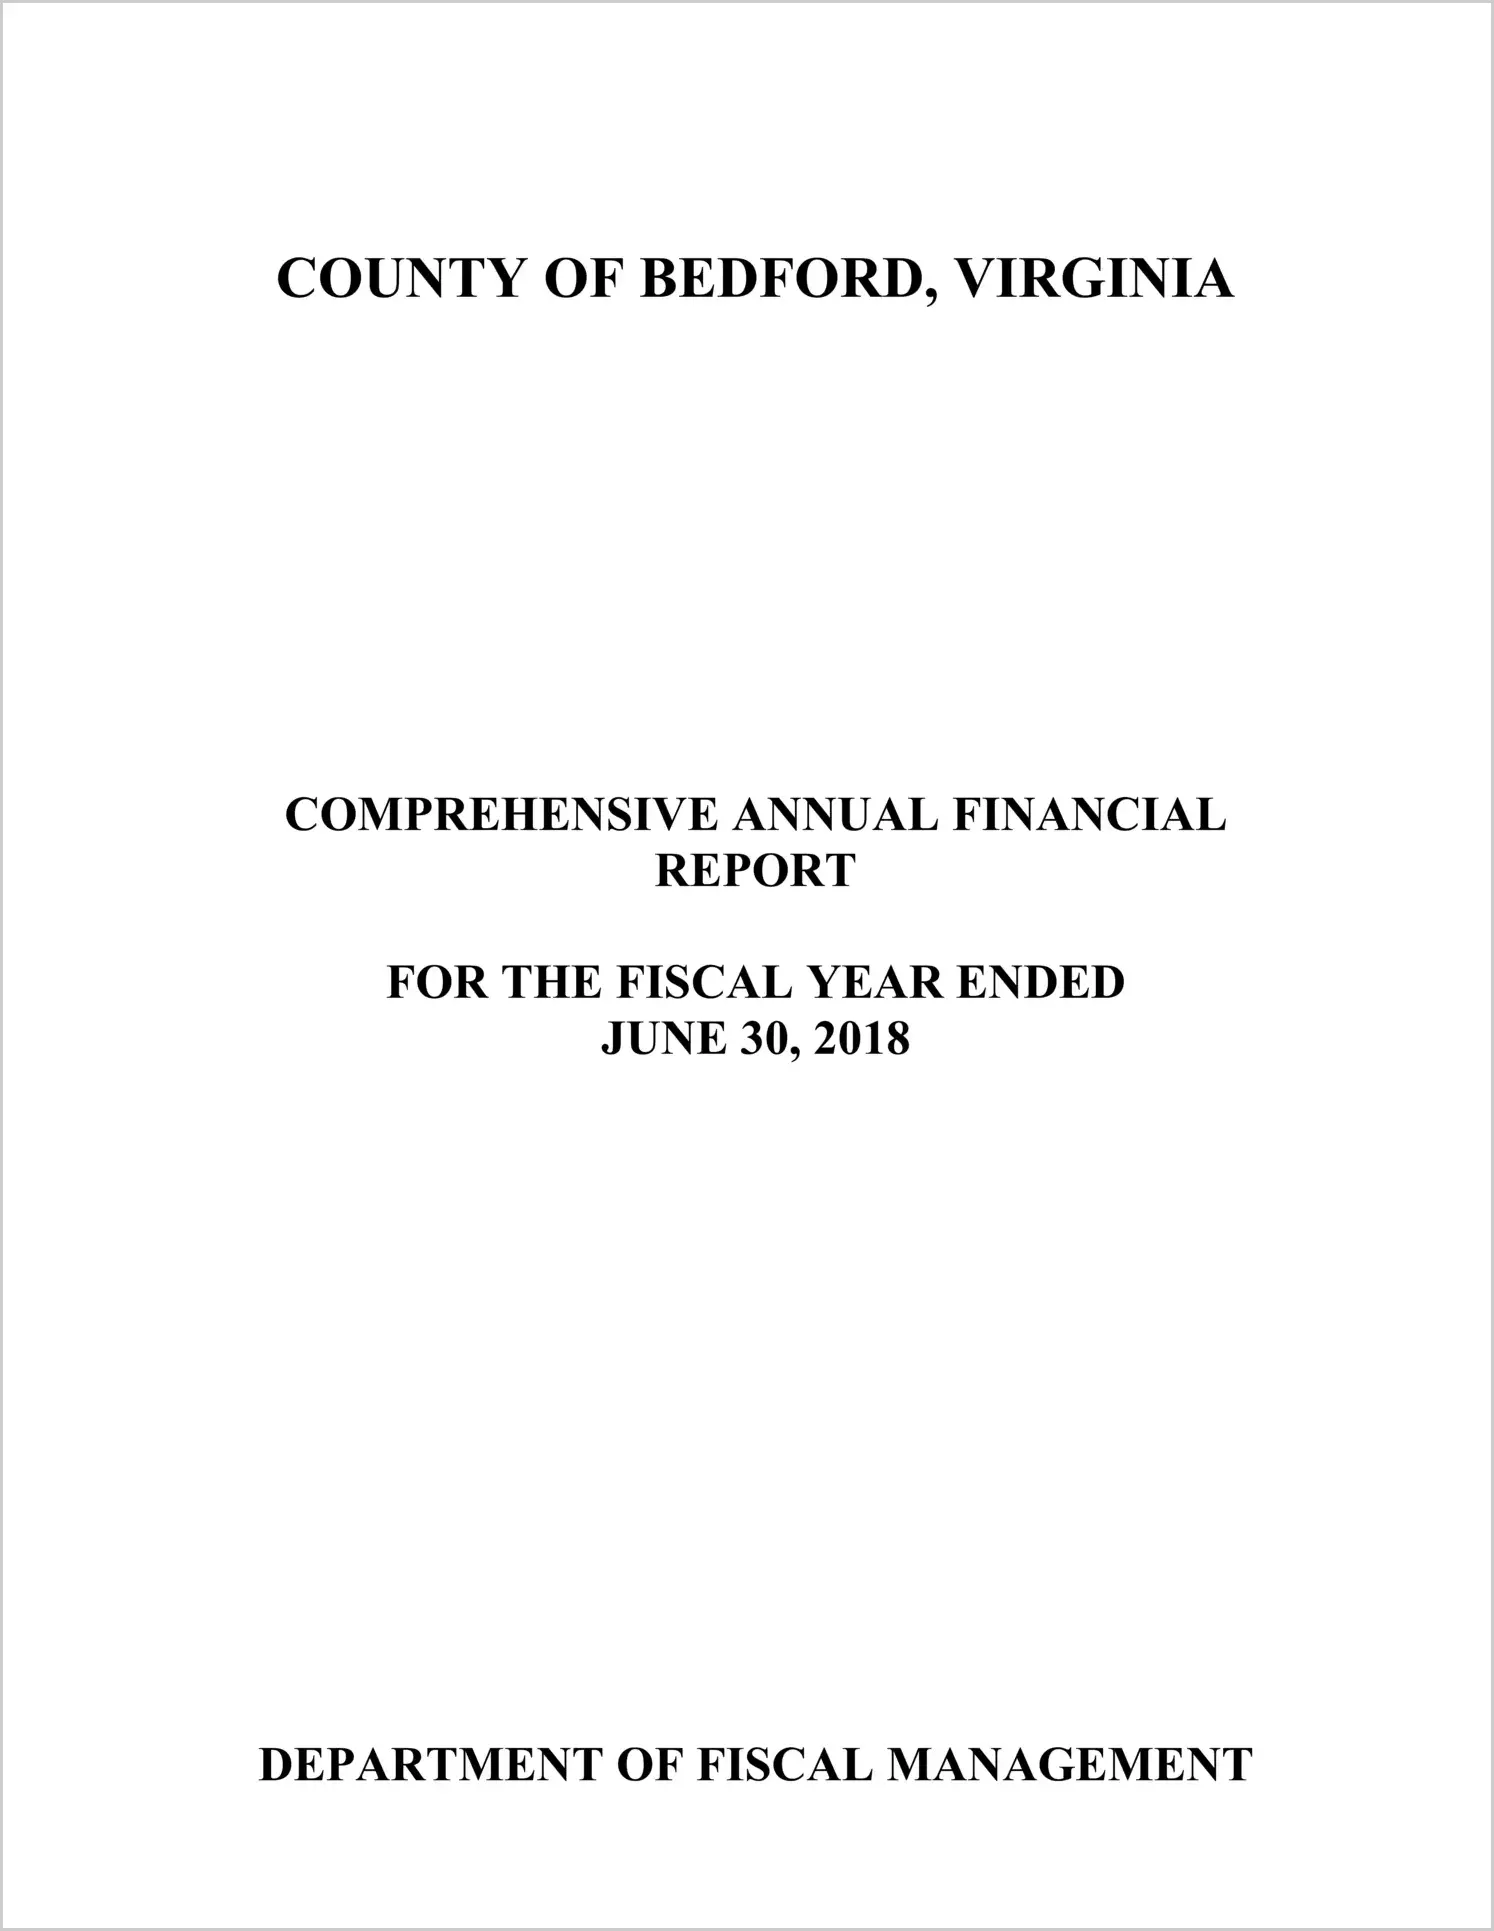 2018 Annual Financial Report for County of Bedford